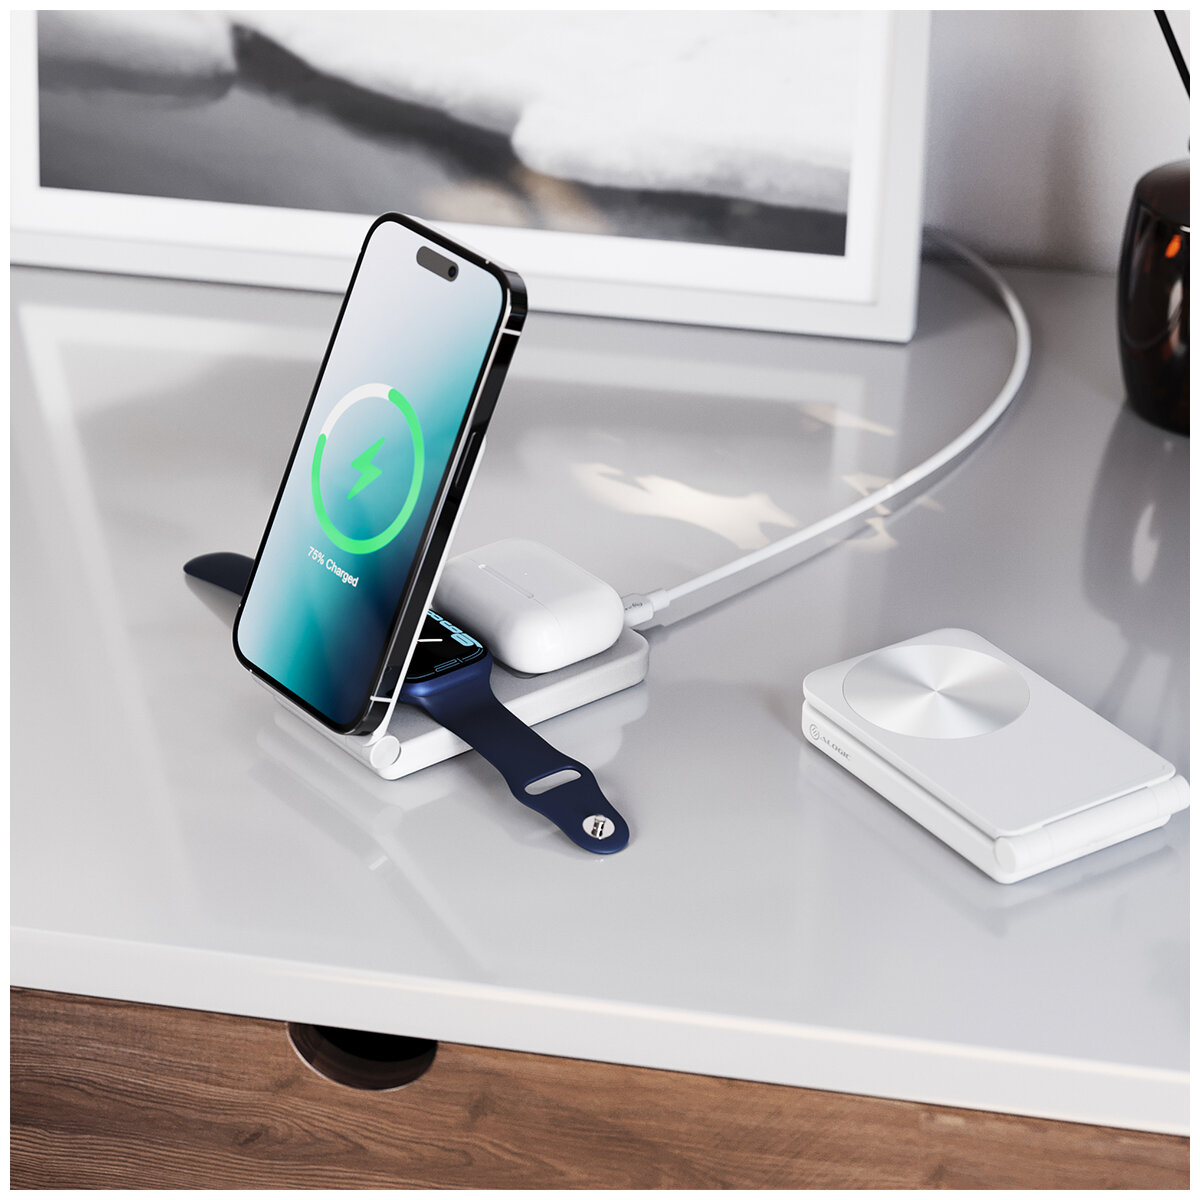 ALOGIC YOGA Fold 3 in 1 Wireless Charging Stand White